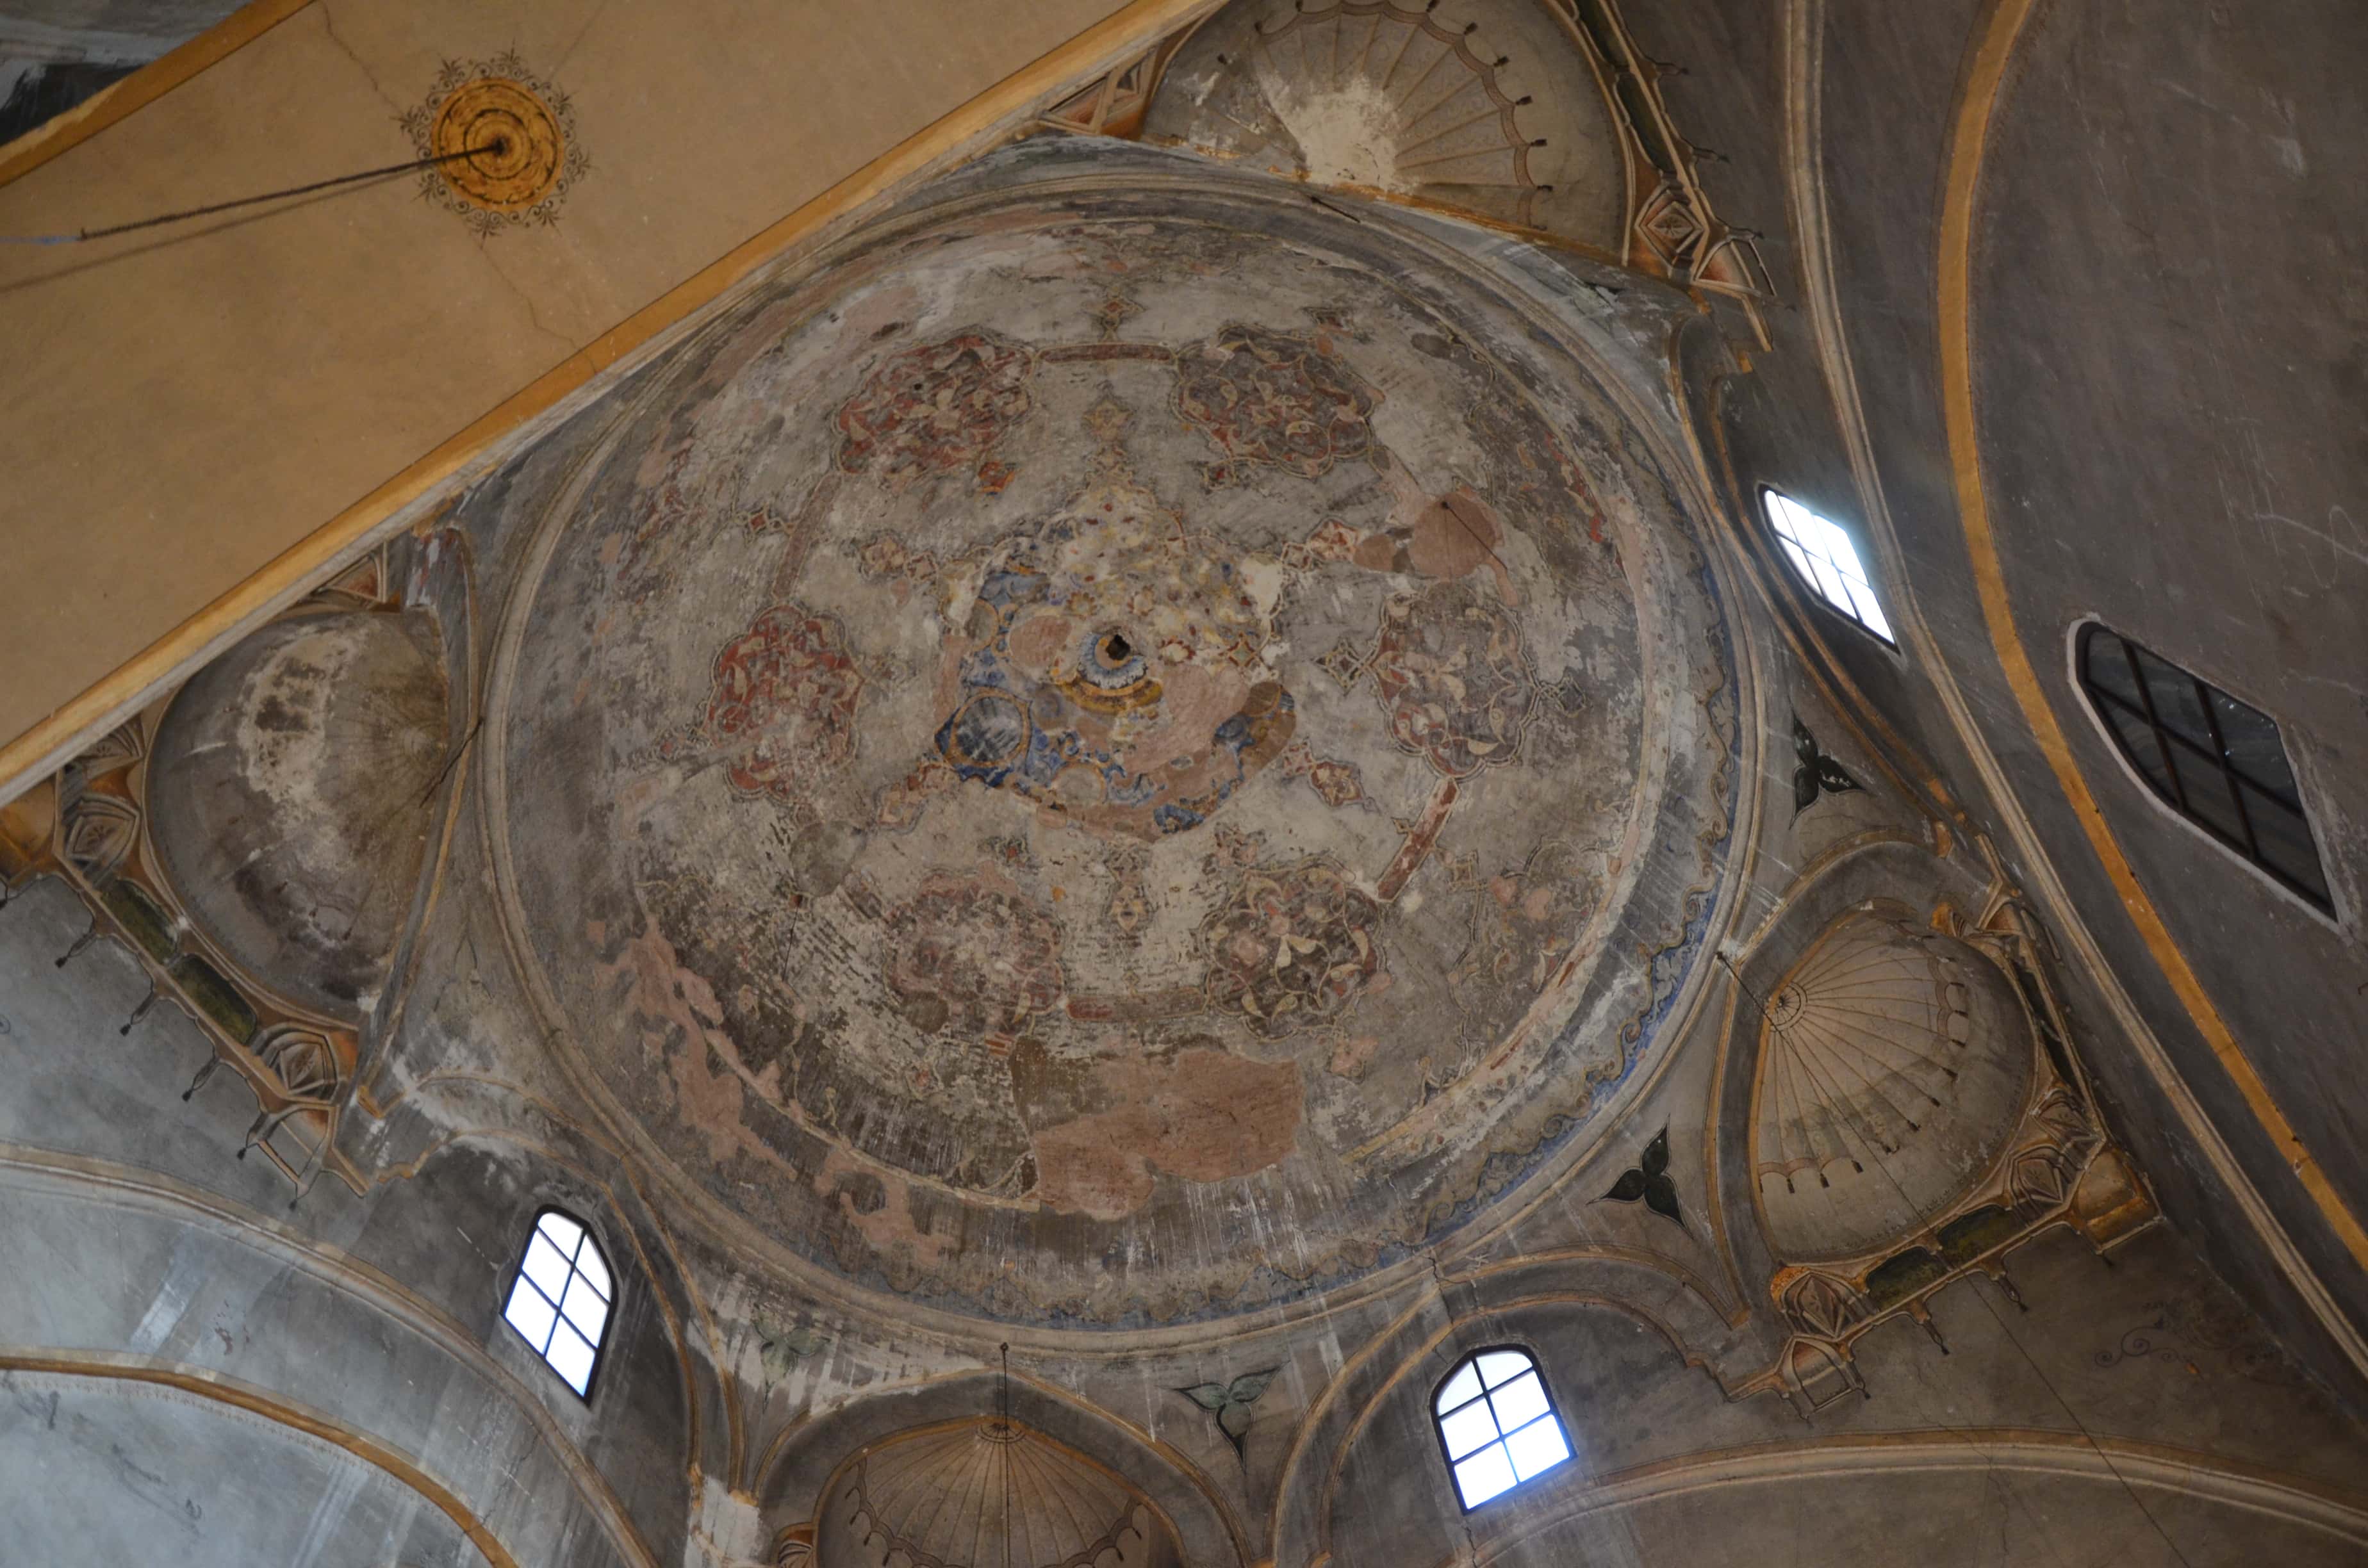 Dome of the Alaca Imaret Mosque in Thessaloniki, Greece